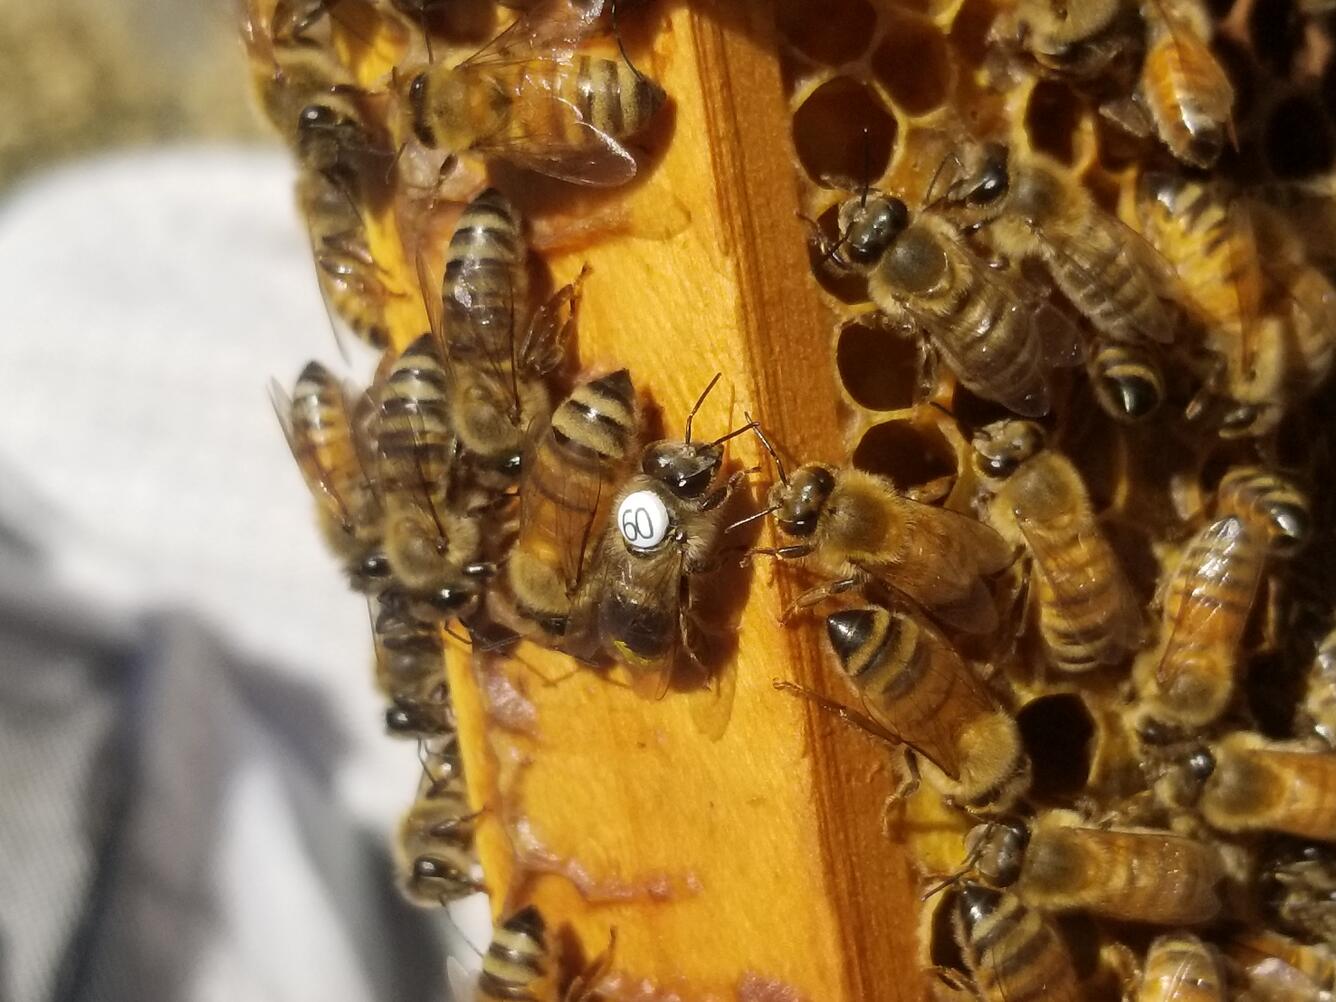 Bee marked with tag white 60 on hive frame